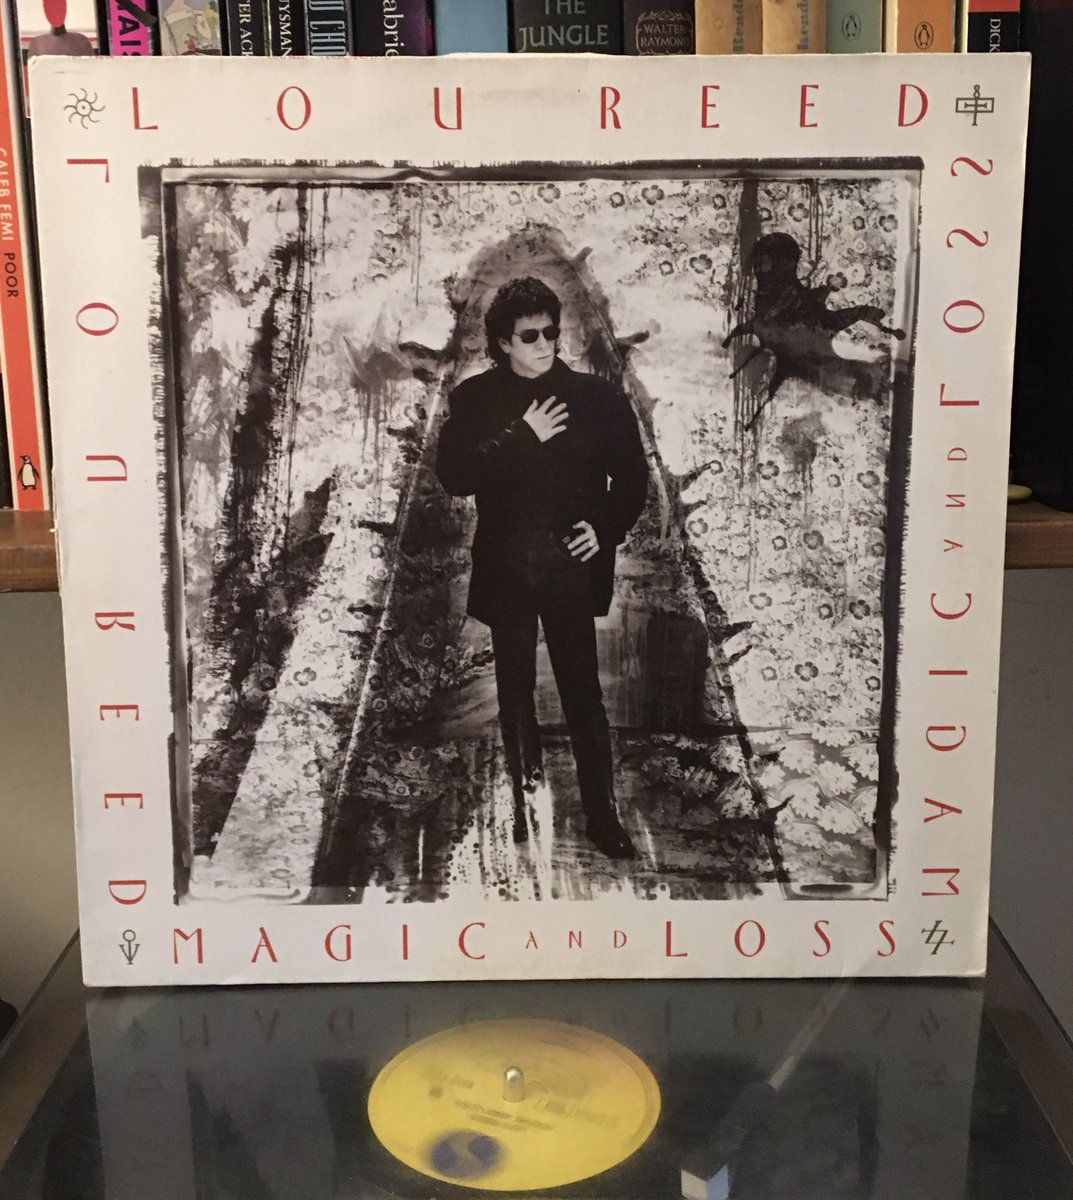 There’s a bit of magic in everything
And then some loss to even things out

Lou Reed: Magic and Loss #5albums92